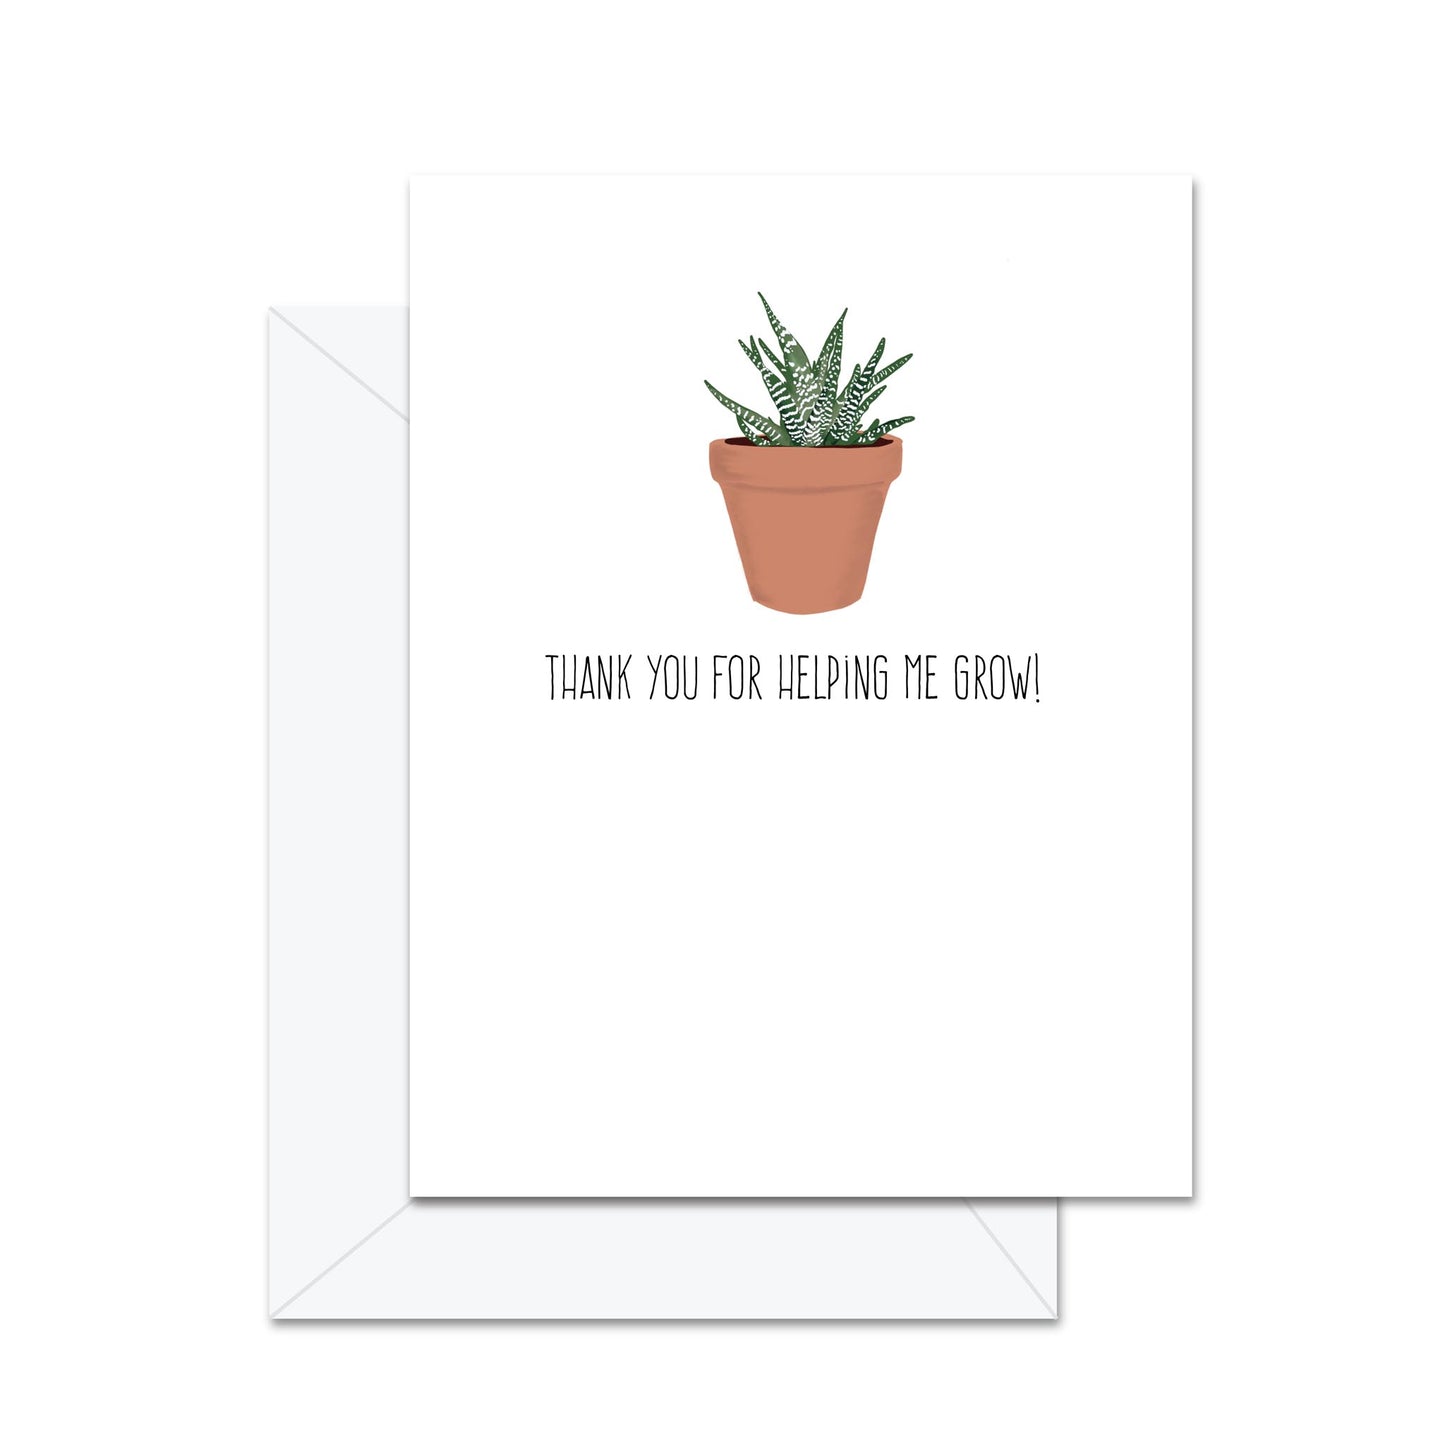 Thanks For Helping Me Grow! - Greeting Card